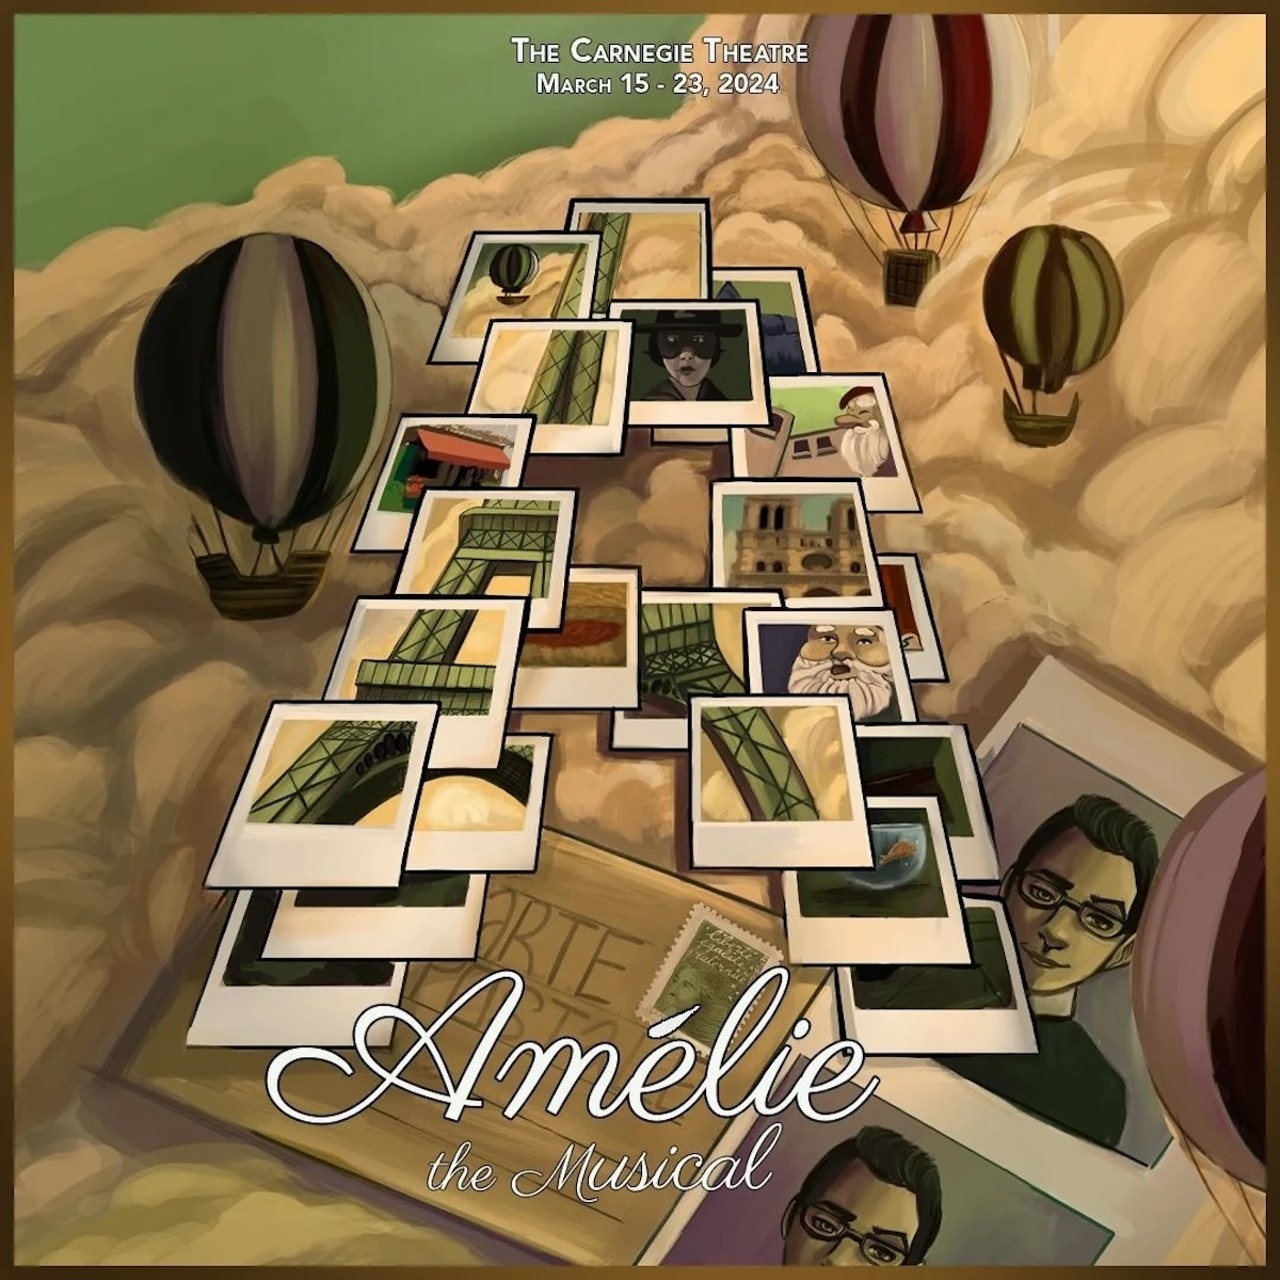 Amélie The Musical at The Carnegie
When: March 22 at 7:30 p.m. and March 23 at 2 & 7:30 p.m.
Where: The Carnegie, Covington
What: Experience the enchanting musical live inspired by the French film of the same name.
Who: The Carnegie
Why: Tout risquer pour l'amour, but make it French.